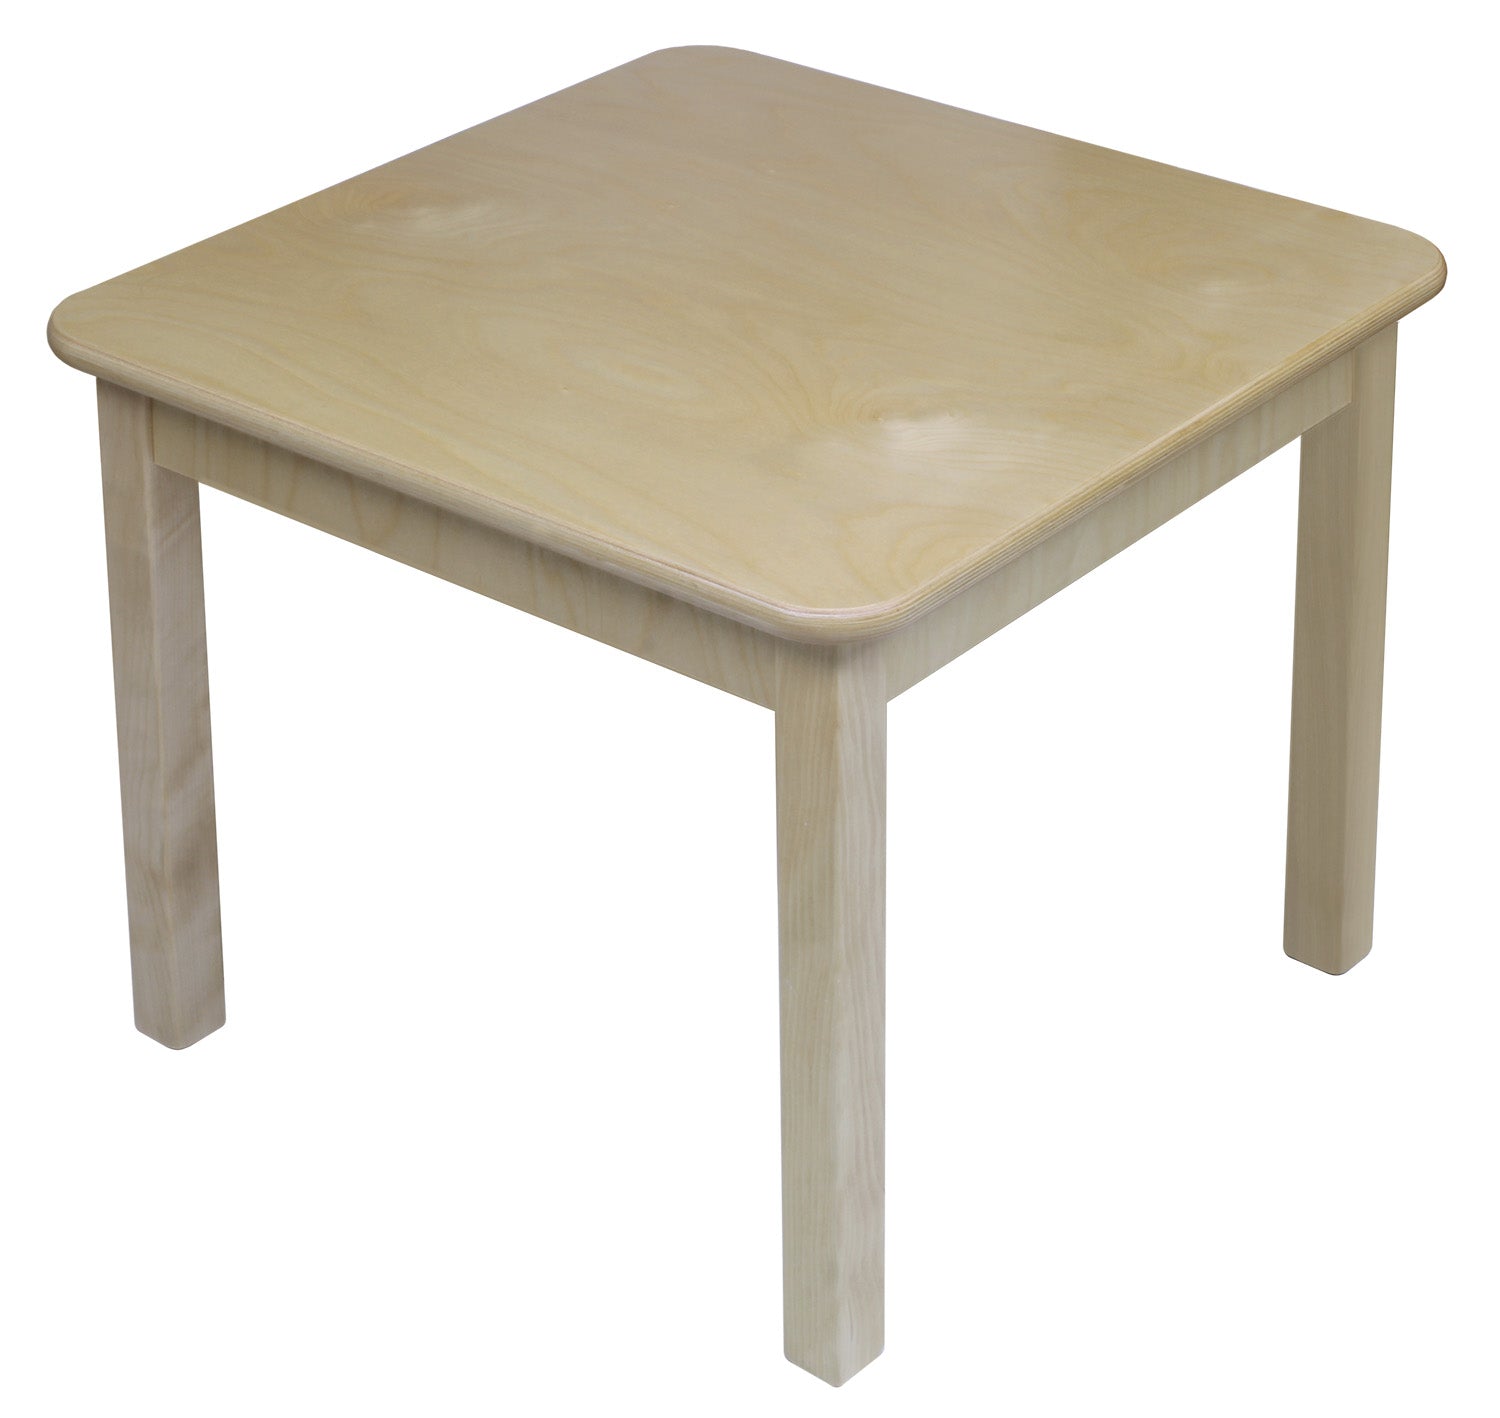 Square Wooden Table 36" X 36" Natural 20" Legs